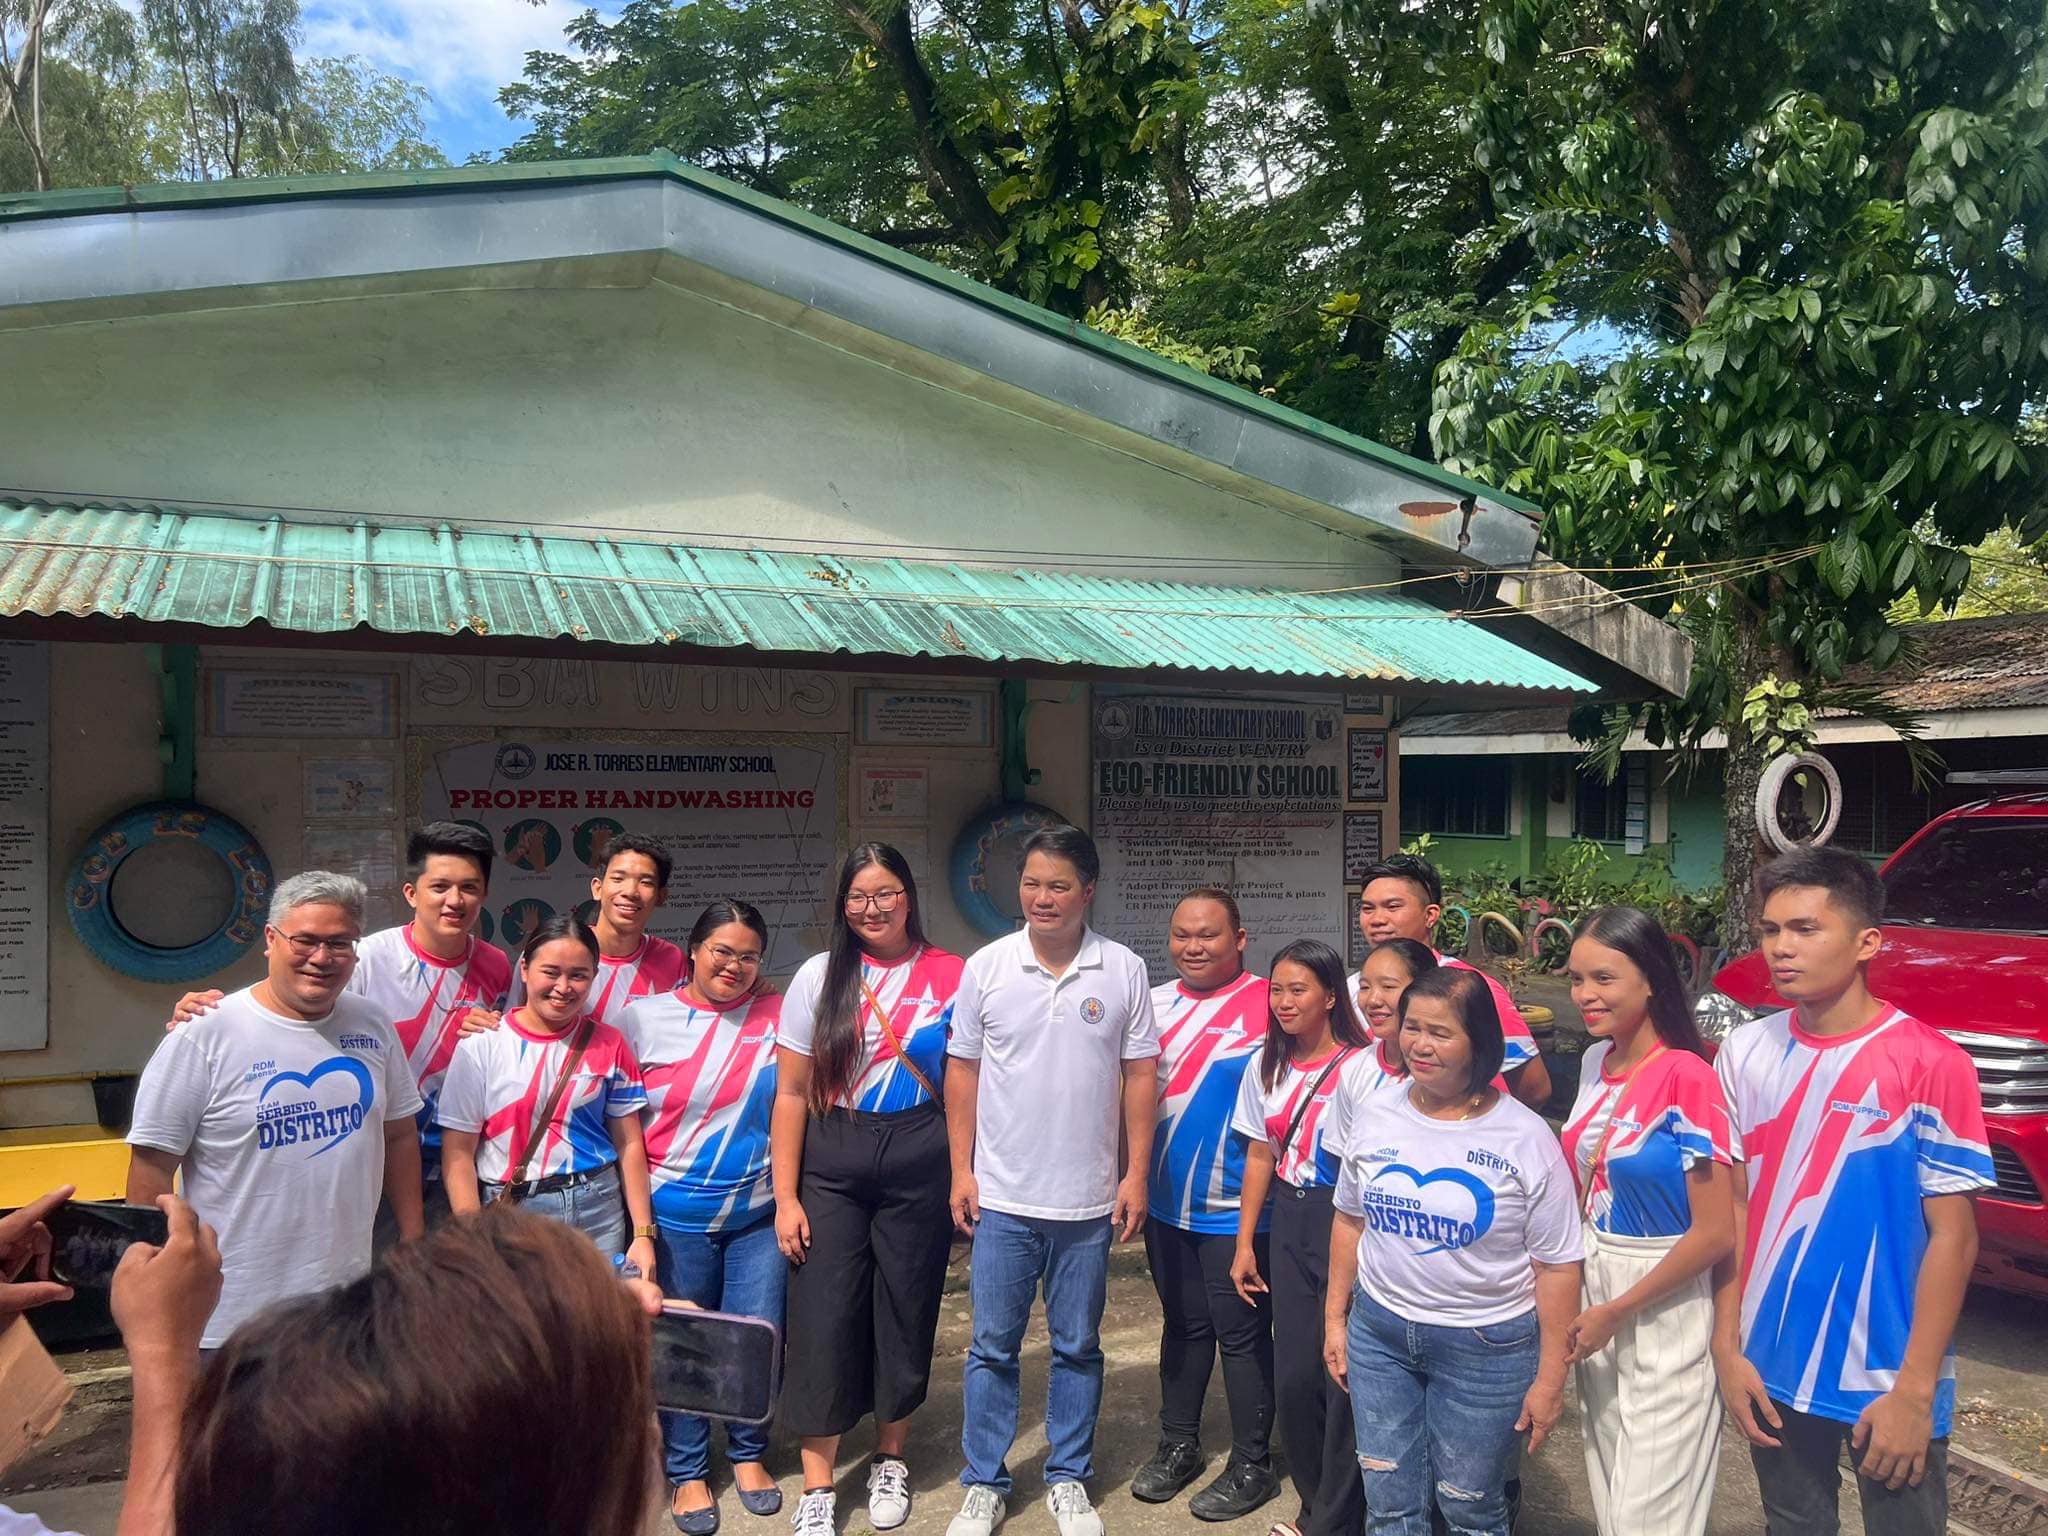 Mayor Albee Benitez and Councilor Simple Distrito with the official RDM-YUPPIES led by Chairman MISAKI BAYLON – Atty. Caesar Distrito